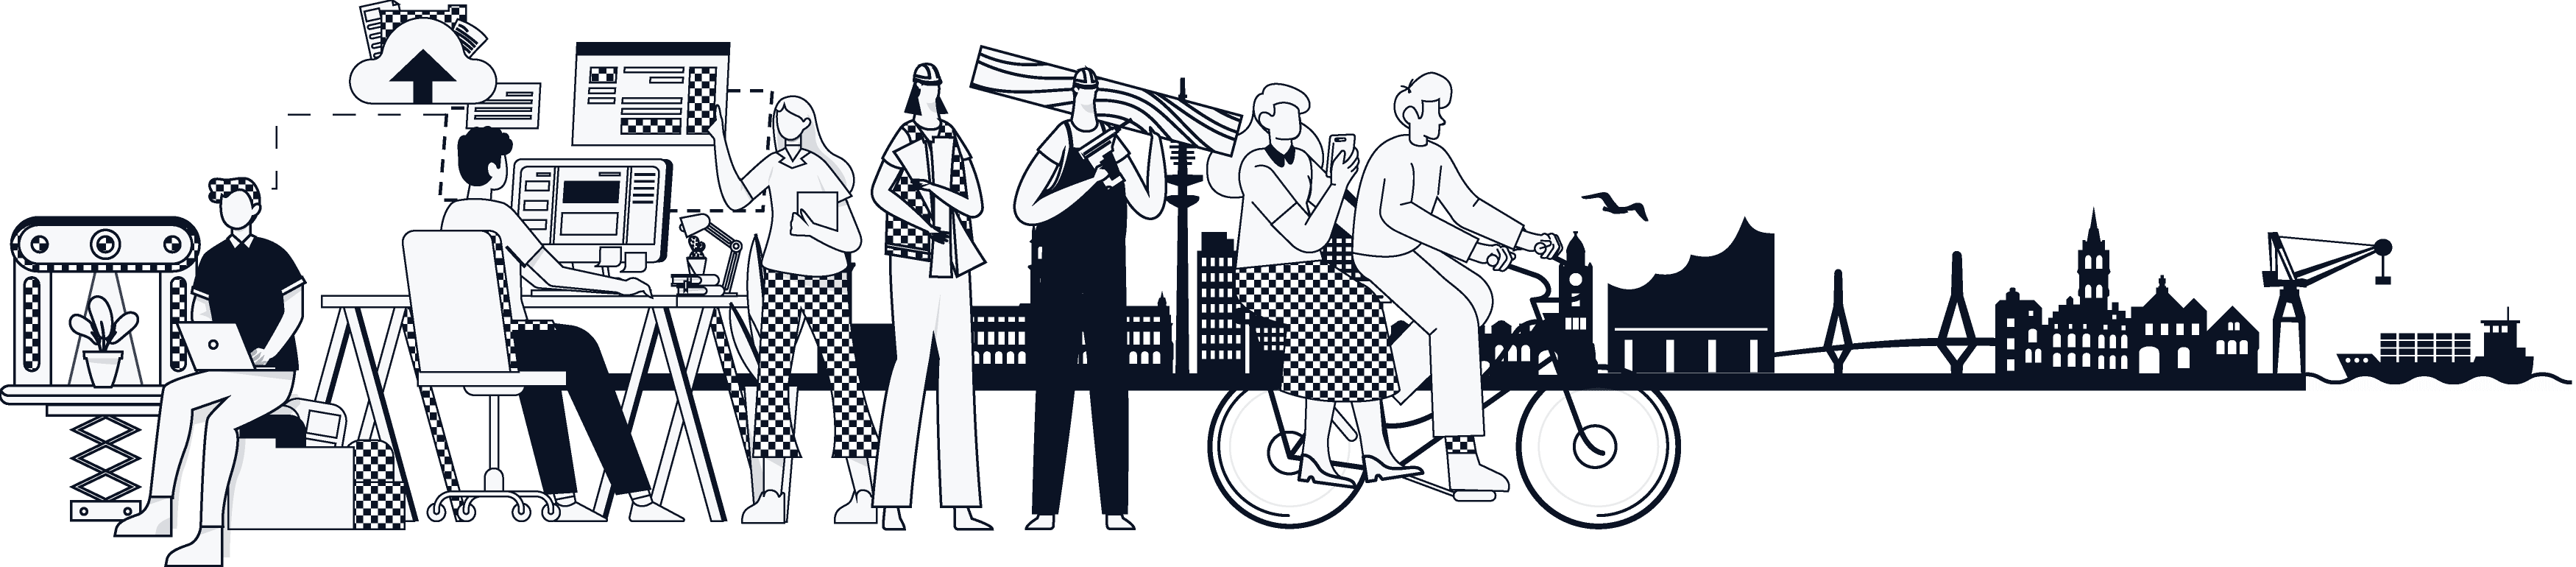 Monochrome stylized illustration of a city and the people working and living in it